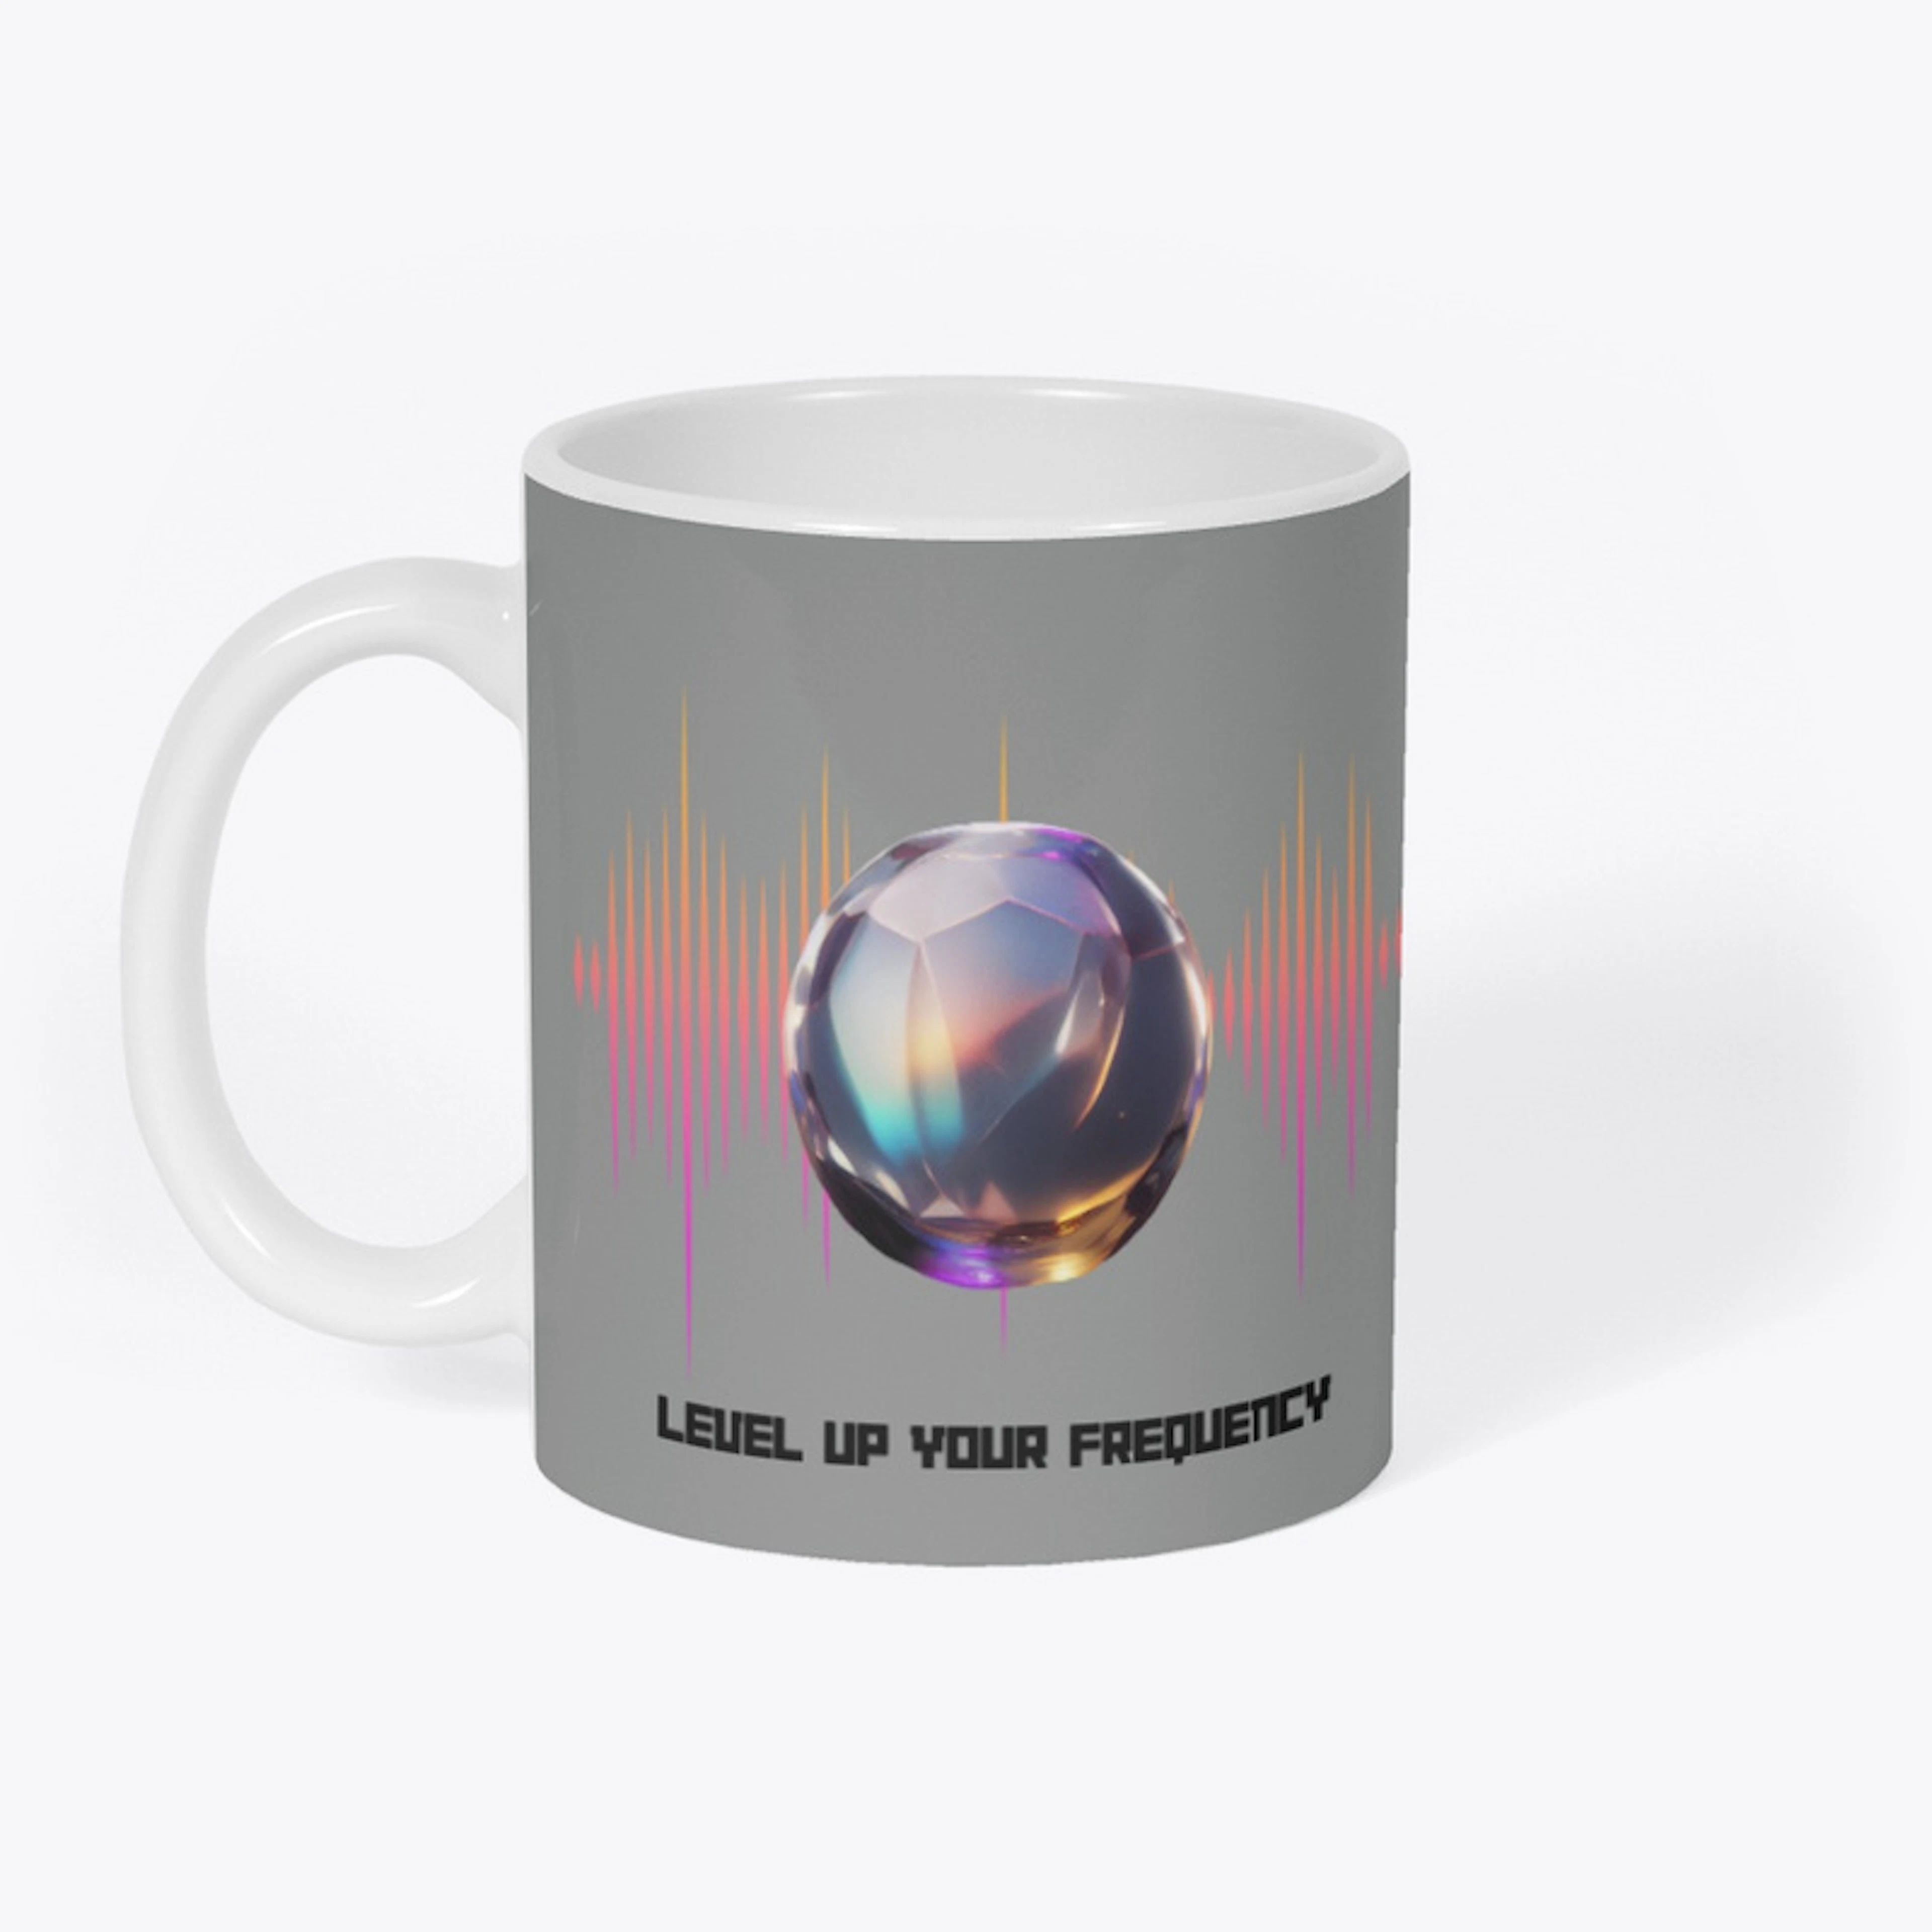 "Level Up Your Frequency" Collection